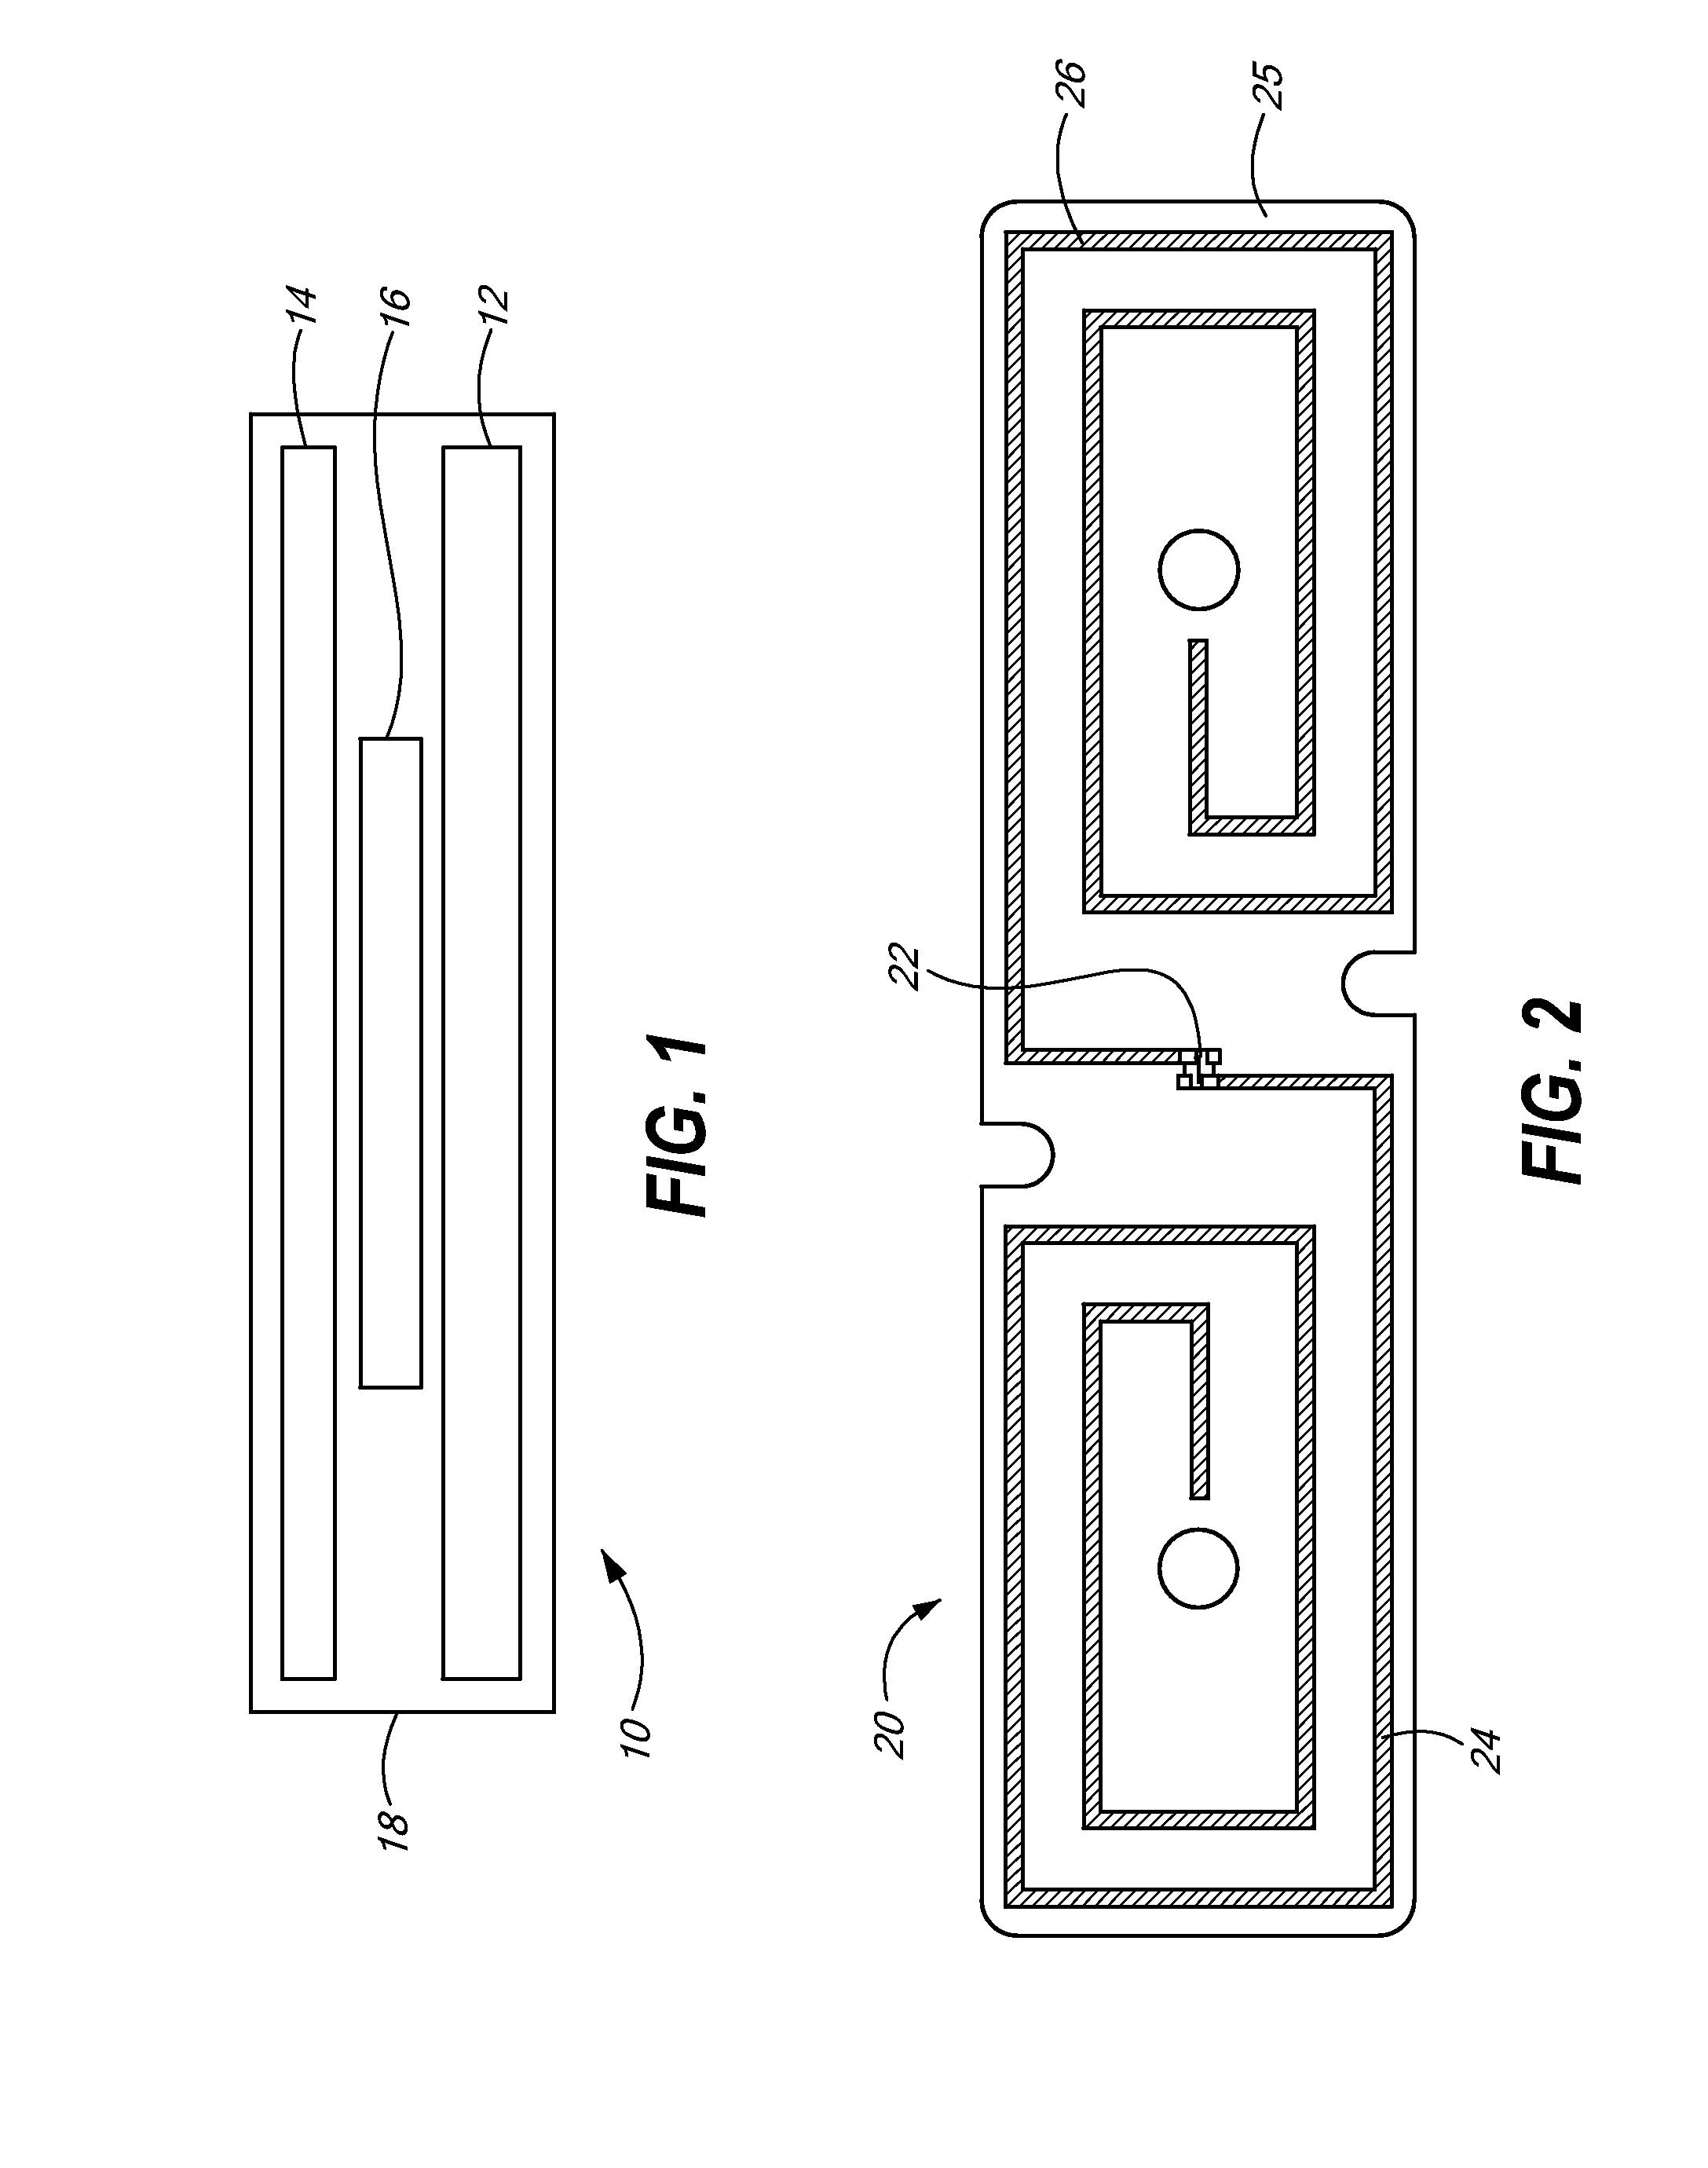 Detacher system and method having an RFID antenna for a combination eas and RFID tag